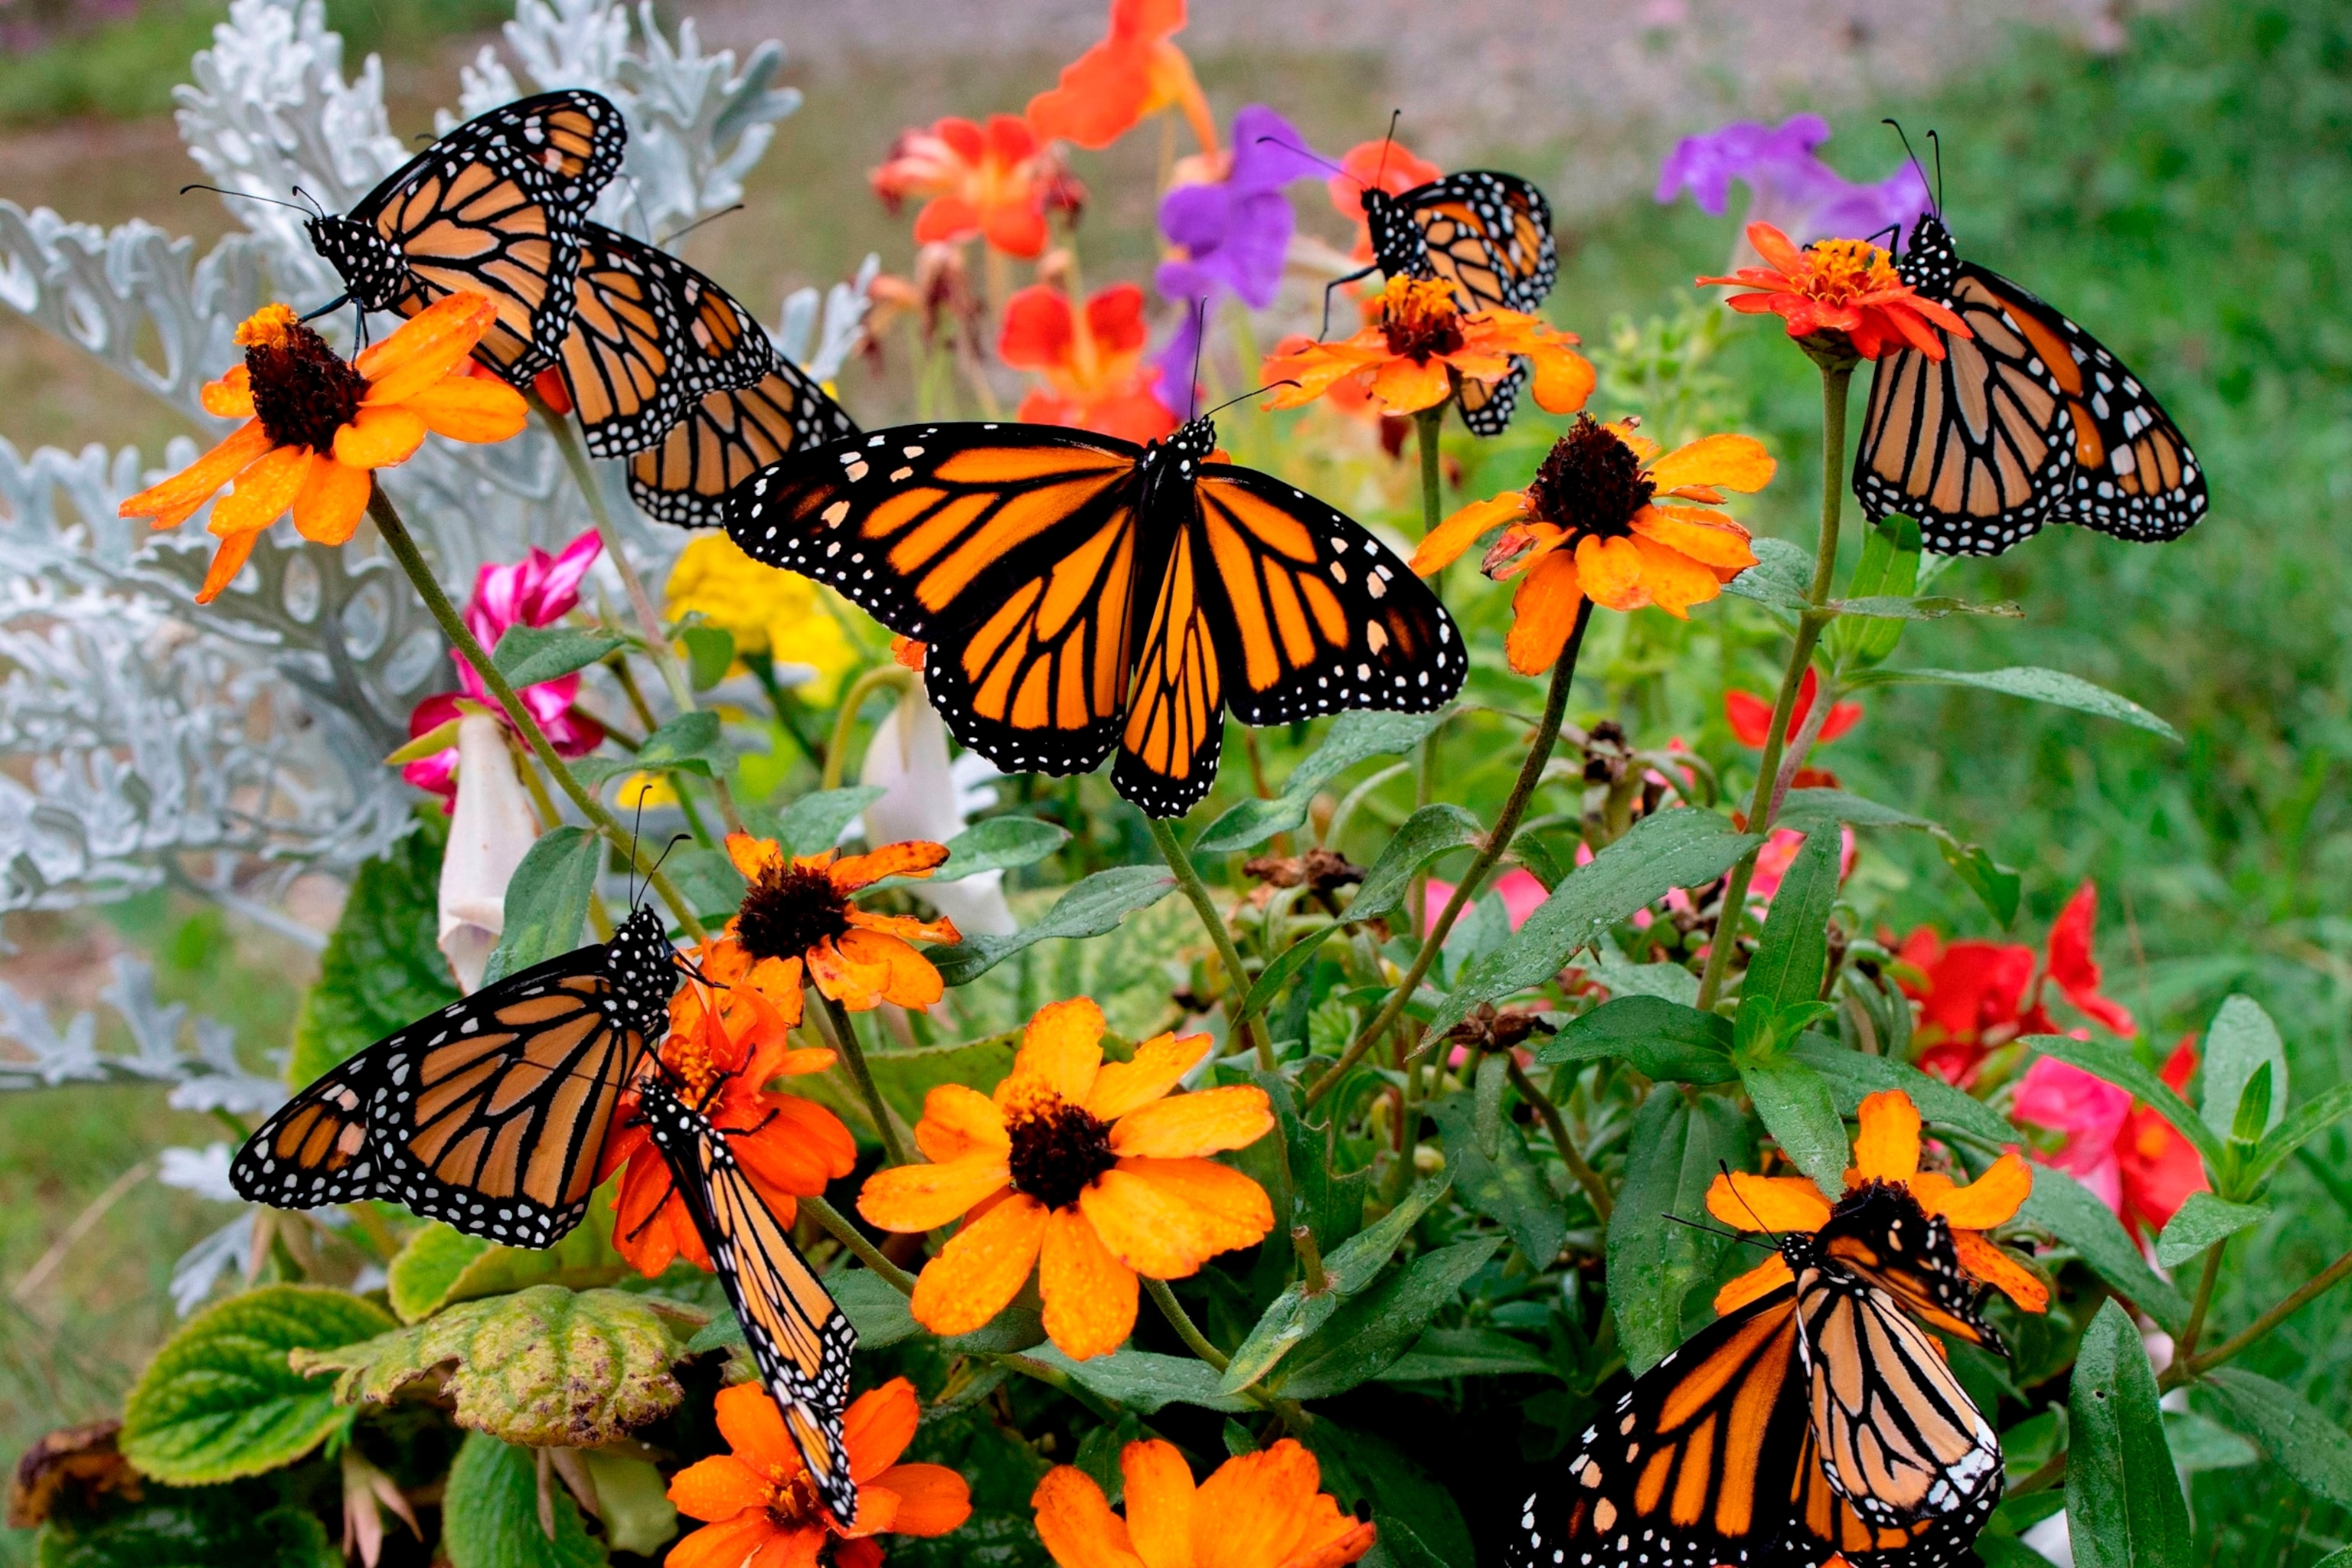 PHOTO: Newly released monarch butterflies, raised from a kit at home, land on garden flowers for the first time, Aug. 10, 2022 in Chatham, New Hampshire.